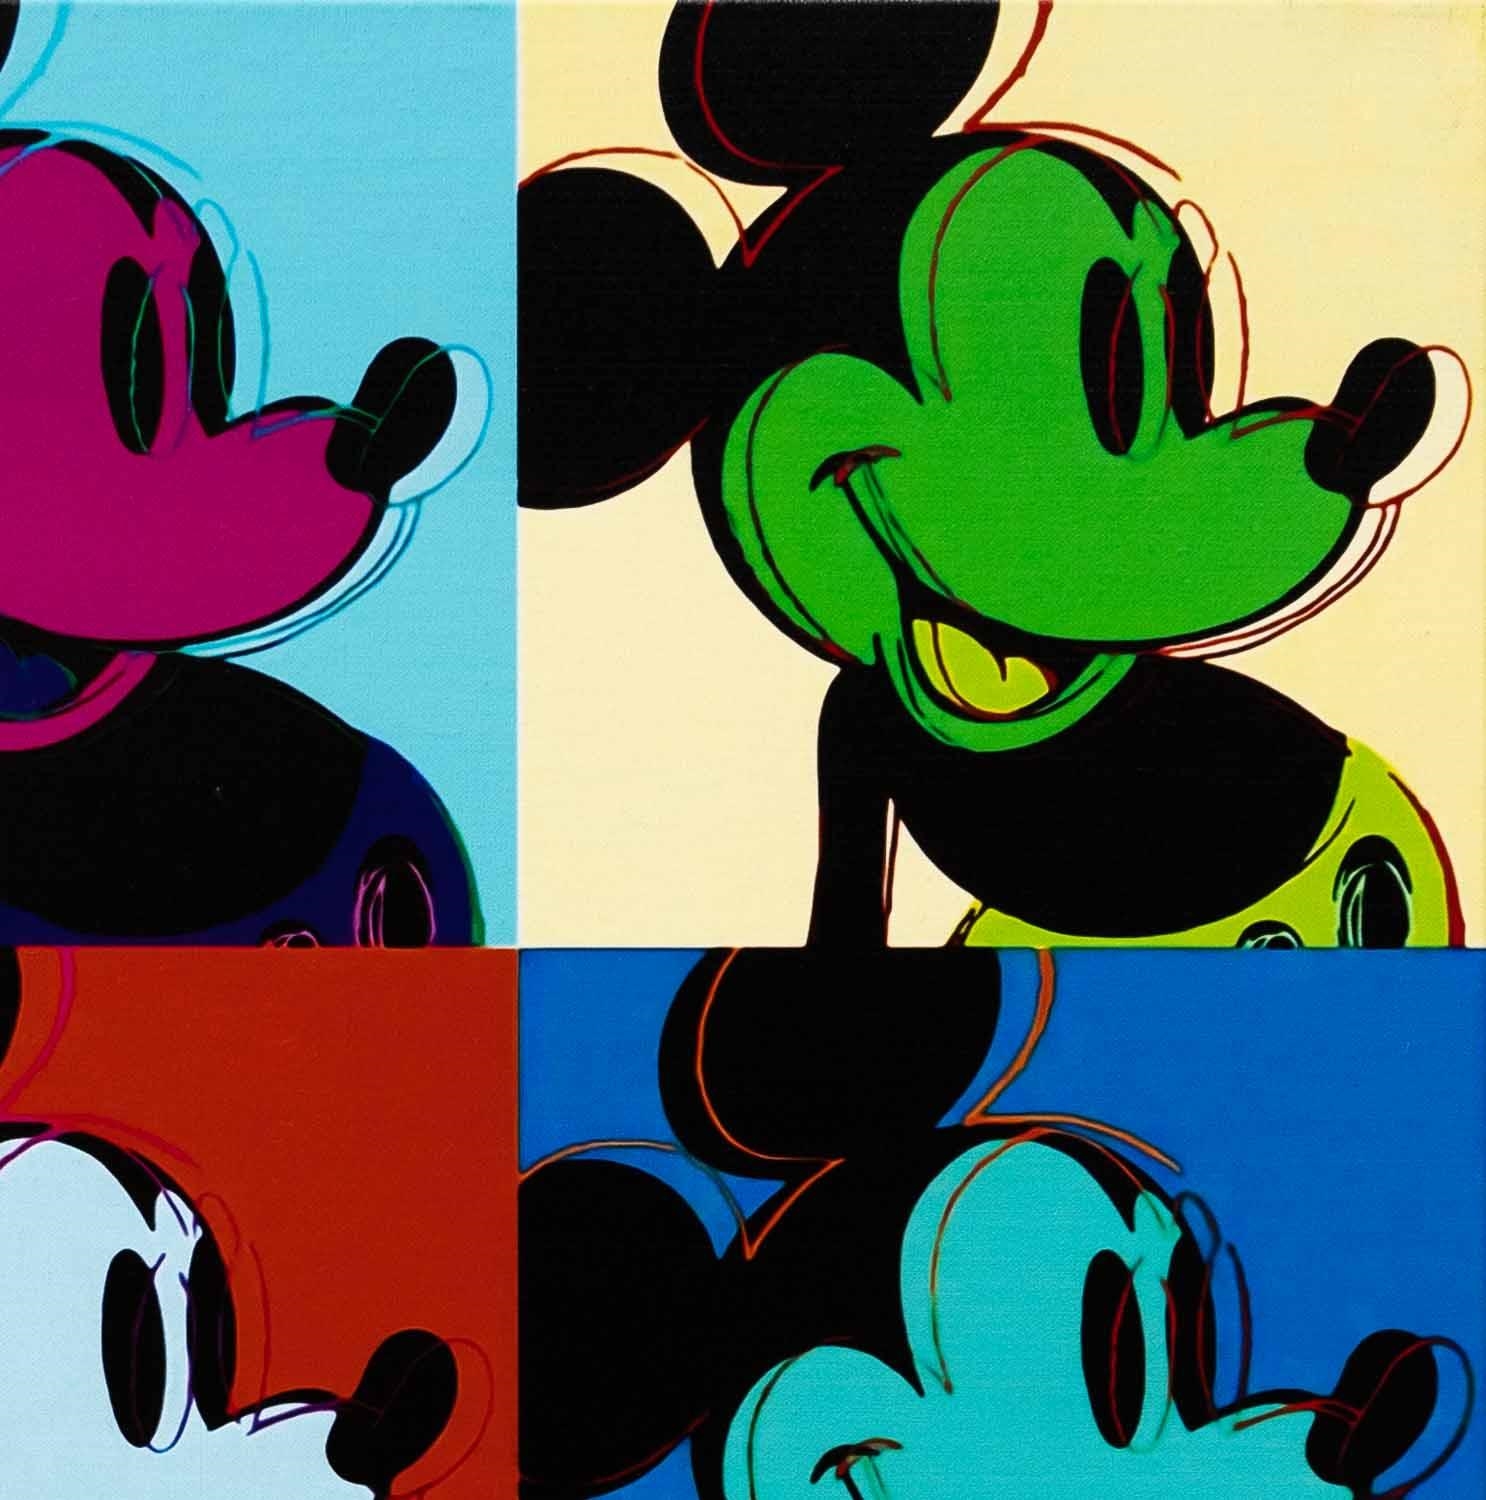 pop art andy warhol mickey mouse